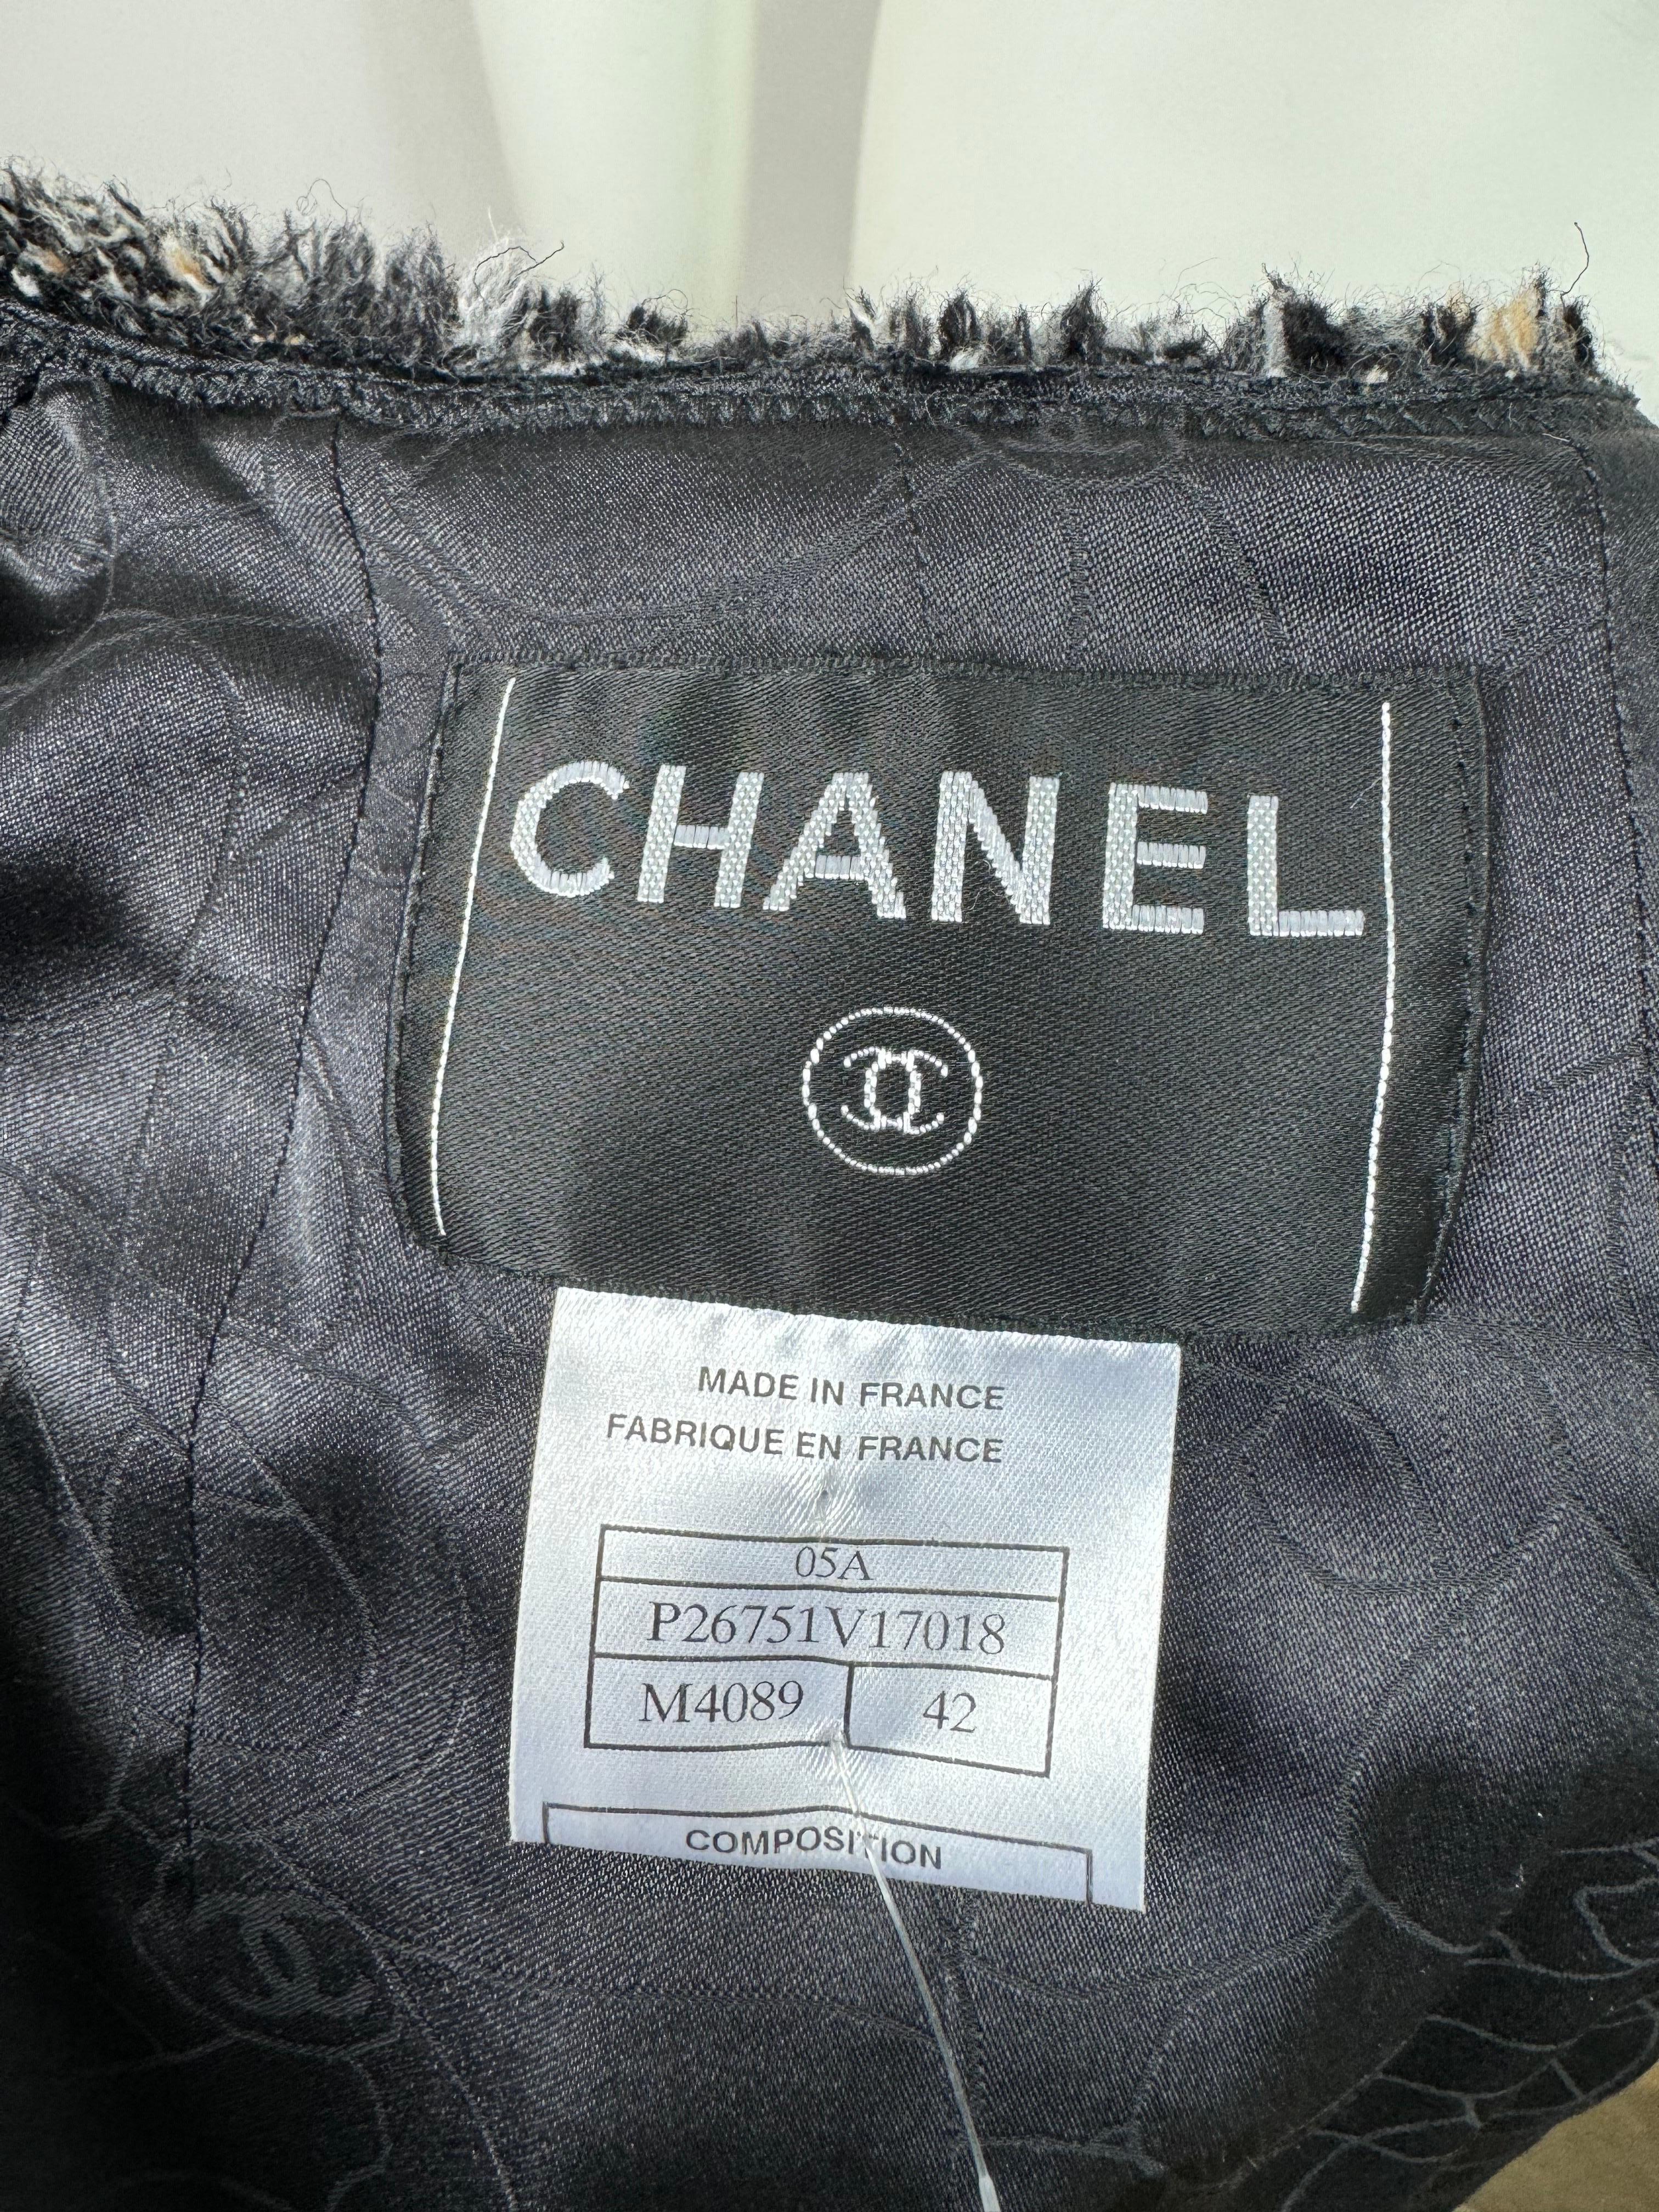 Chanel Vintage Fall 2005 Grey Tones Patterned 3/4 Sleeve Tweed Jacket - Size 42 For Sale 6